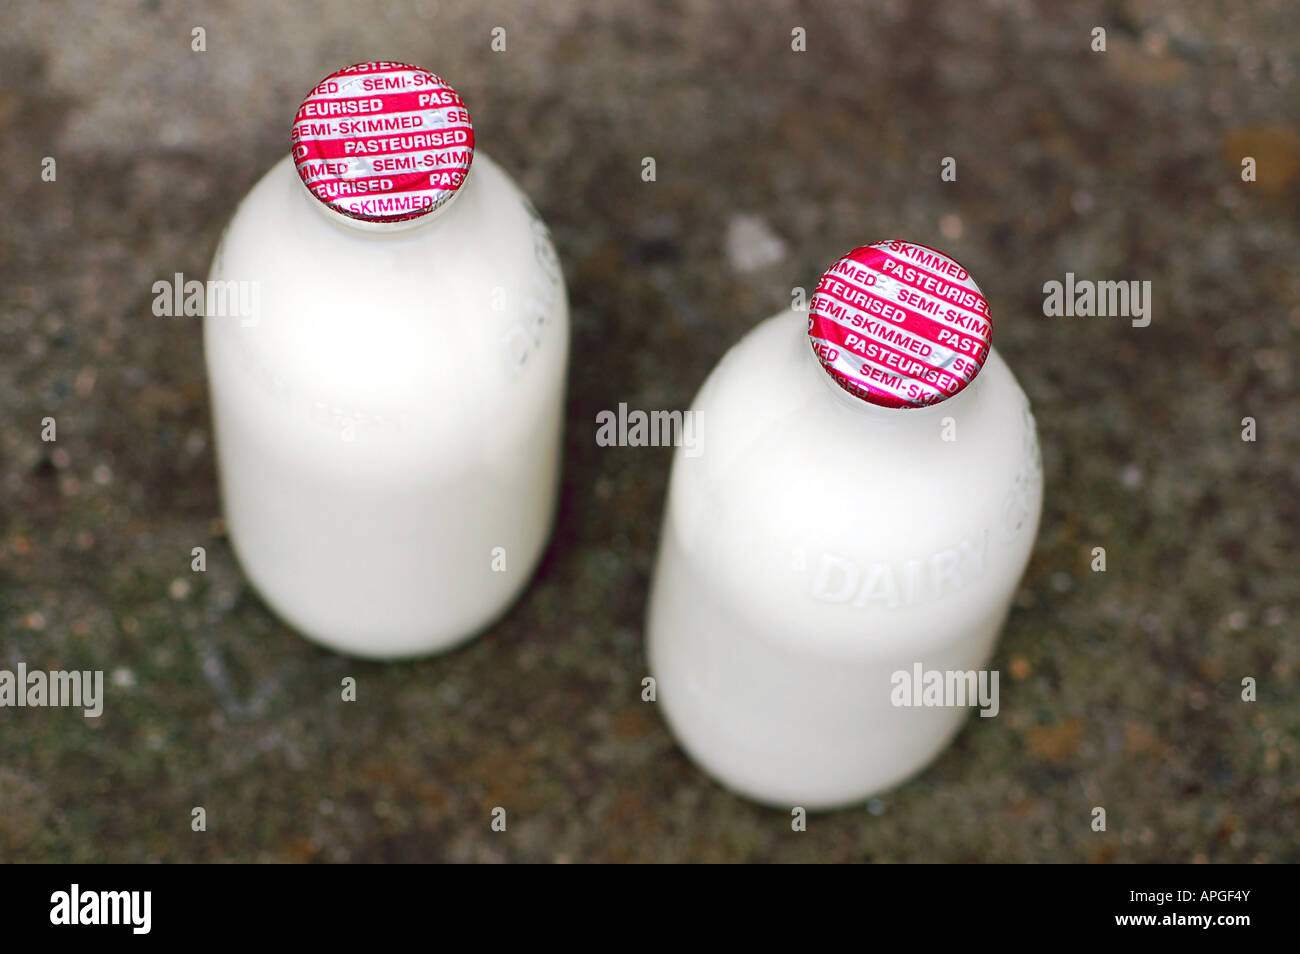 One pint bottles of milk delivered to a doorstep, UK Stock Photo